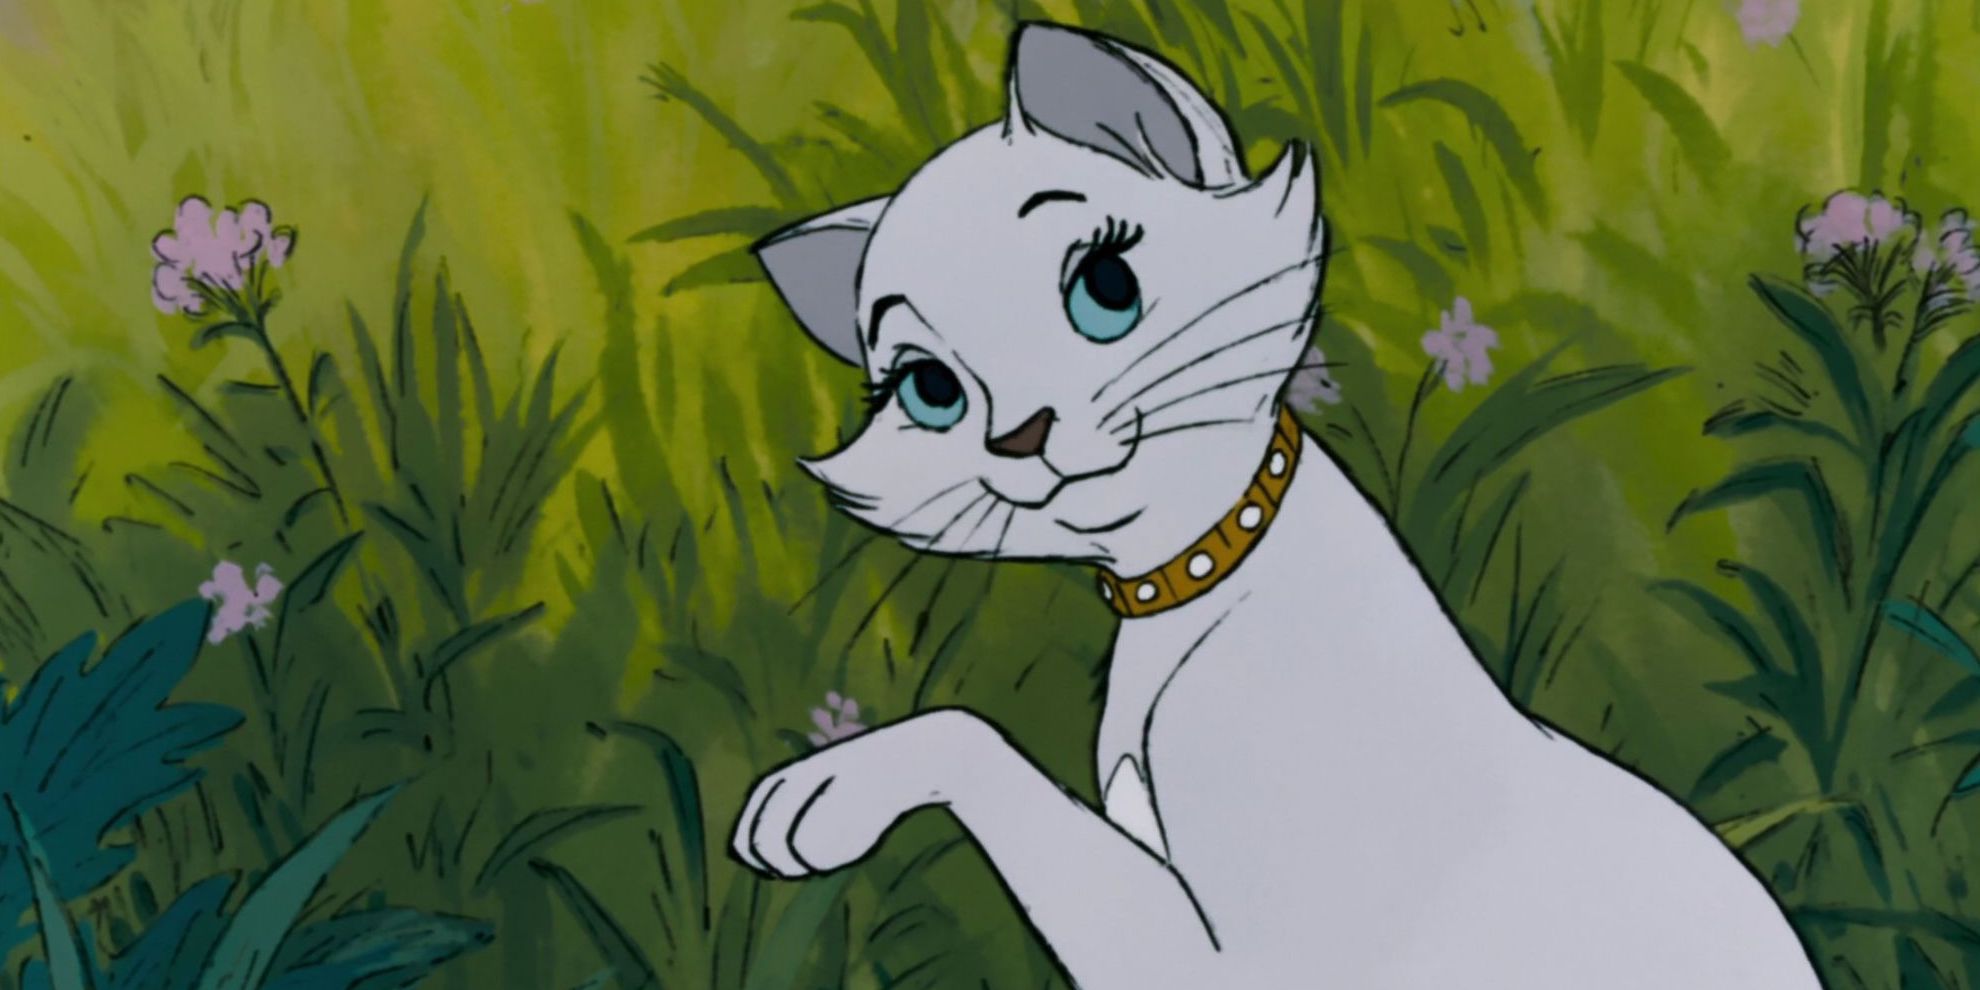 Duchess licking her paw in a scene from Aristocats